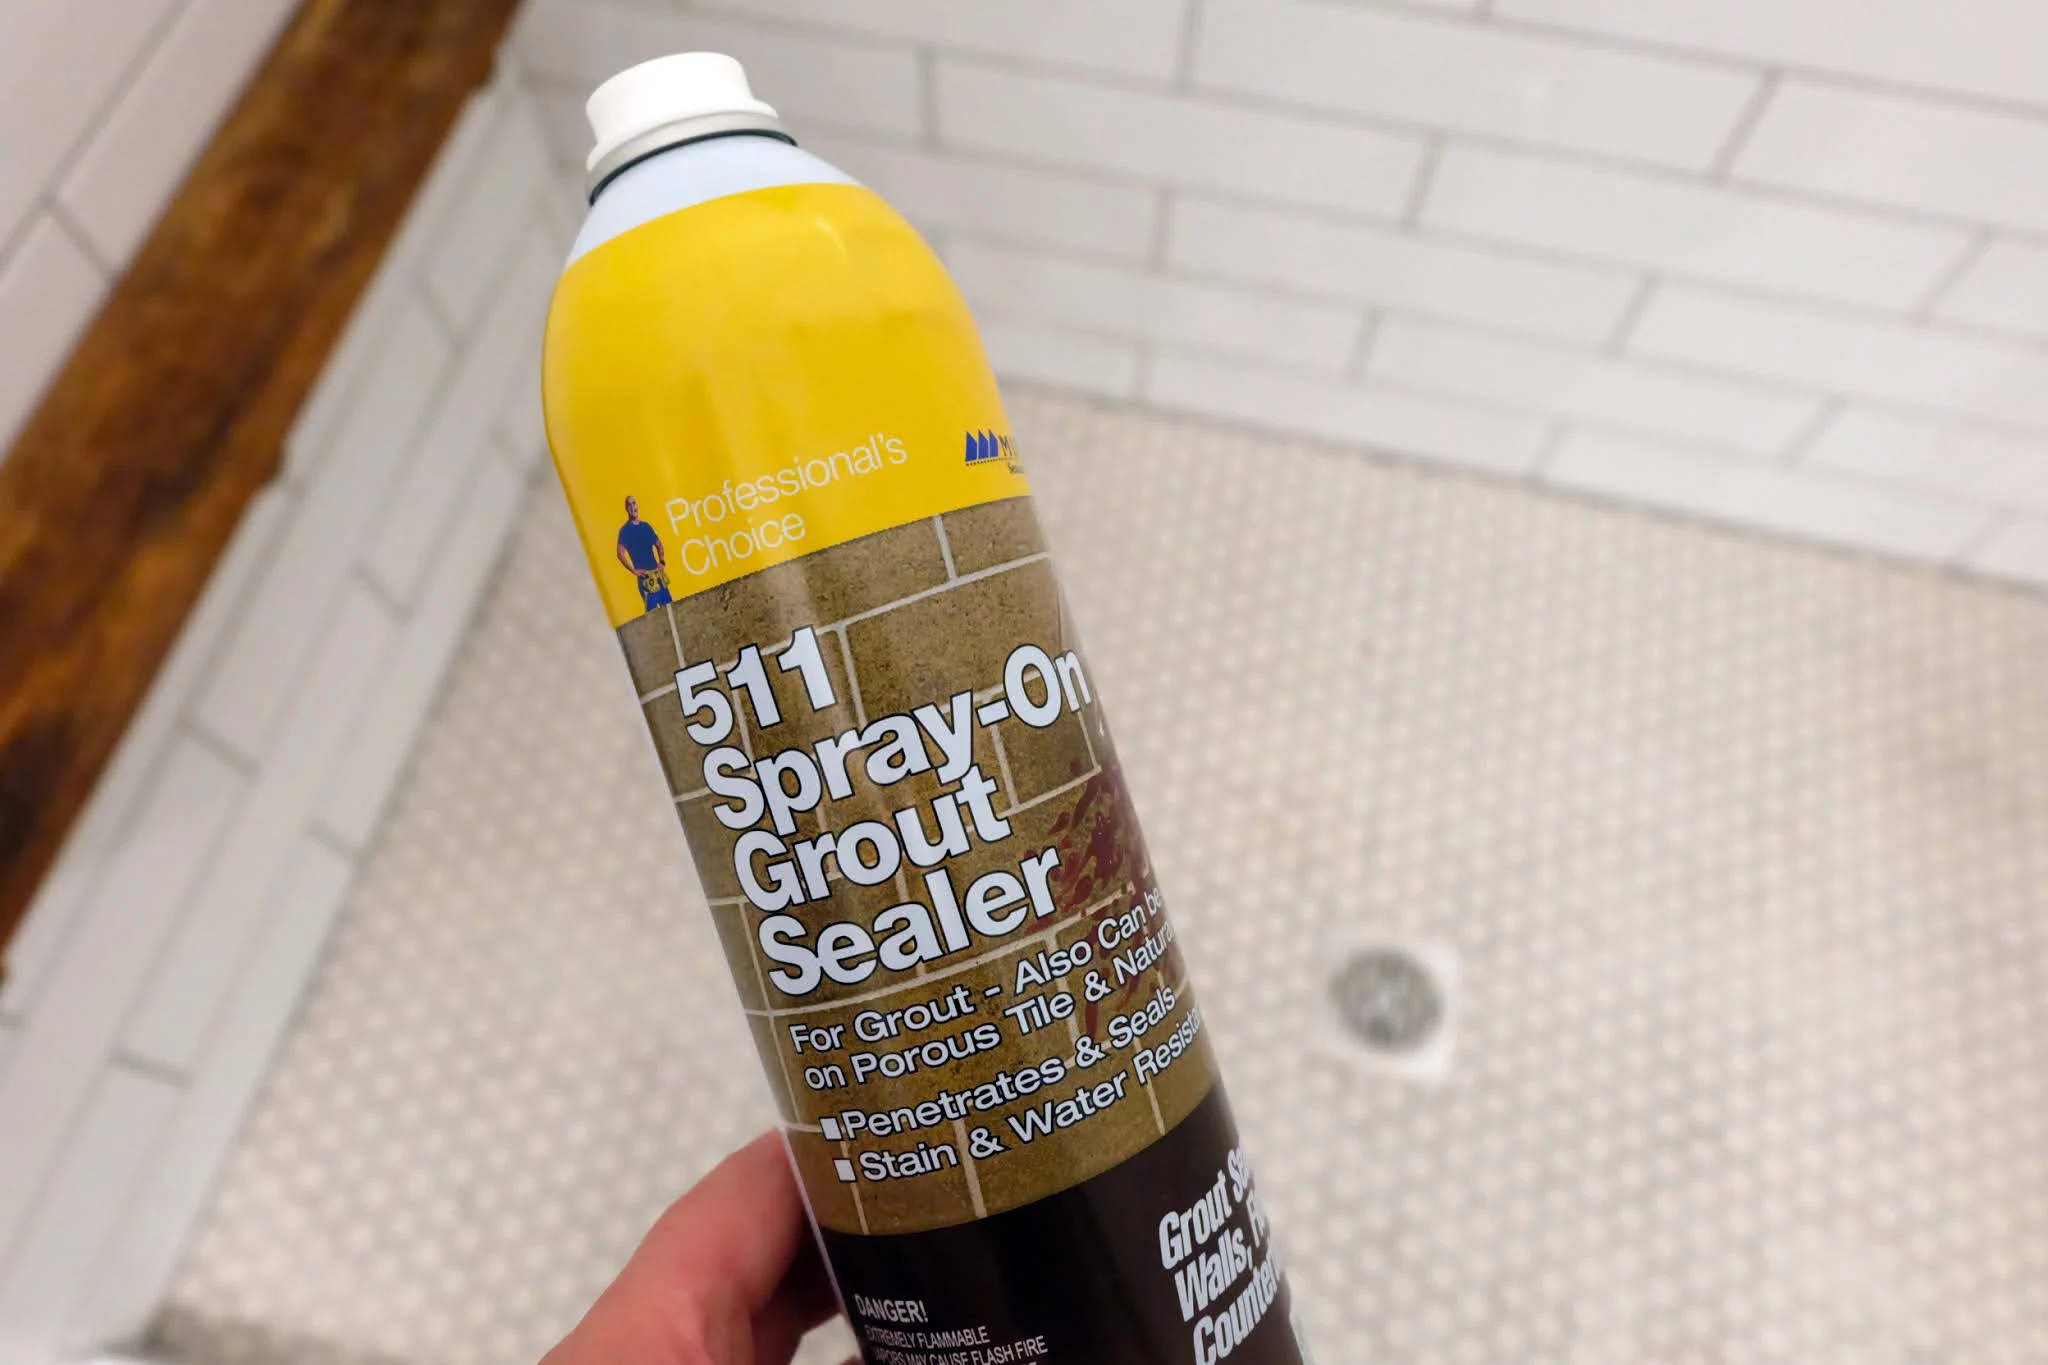 can of grout and tile sealer